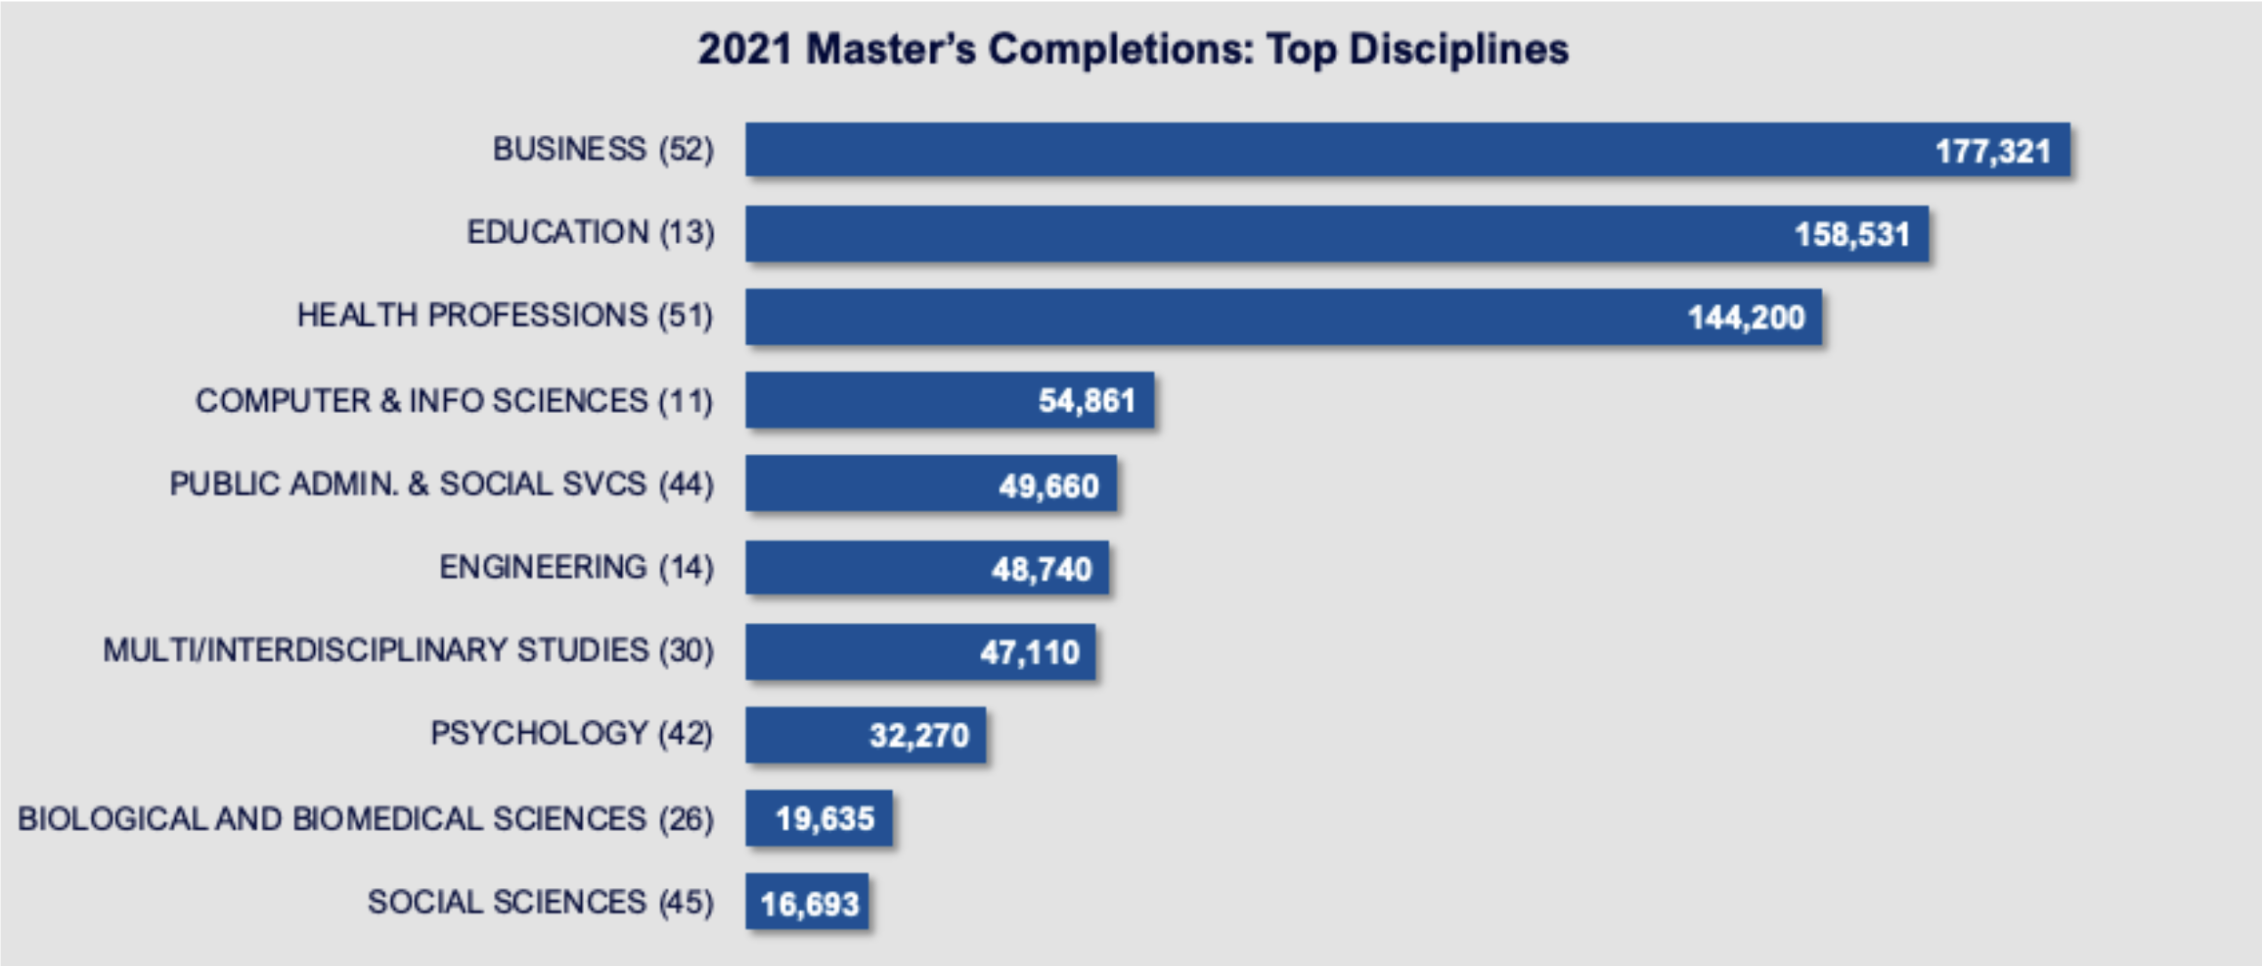 2021 Master's Completions: Top Disciplines